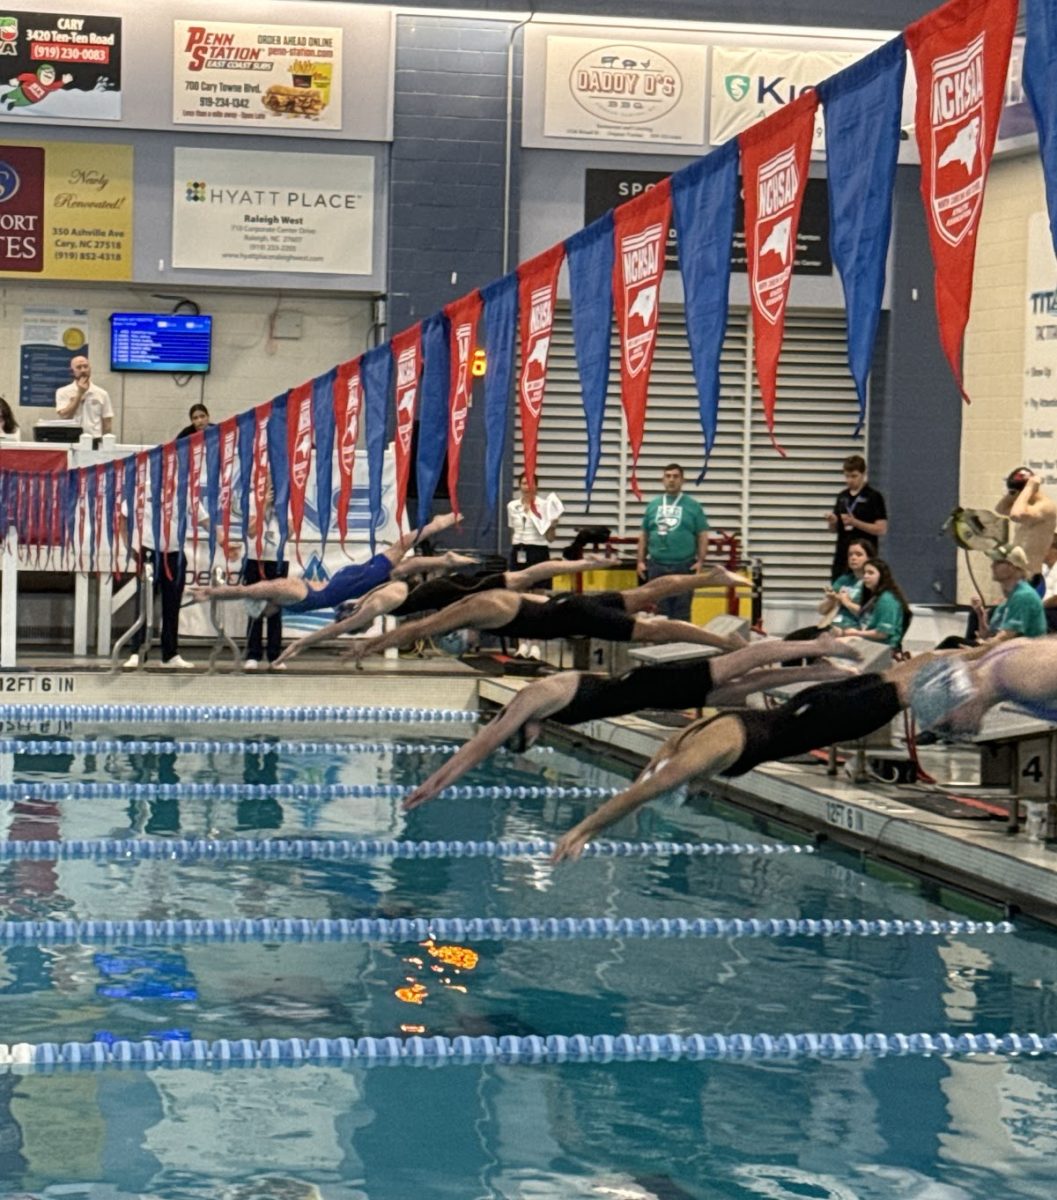 The Green Hope girls diving into a relay during the NCHSAA 4A State Championship Meet, with Green Hope athletes in lane five.
